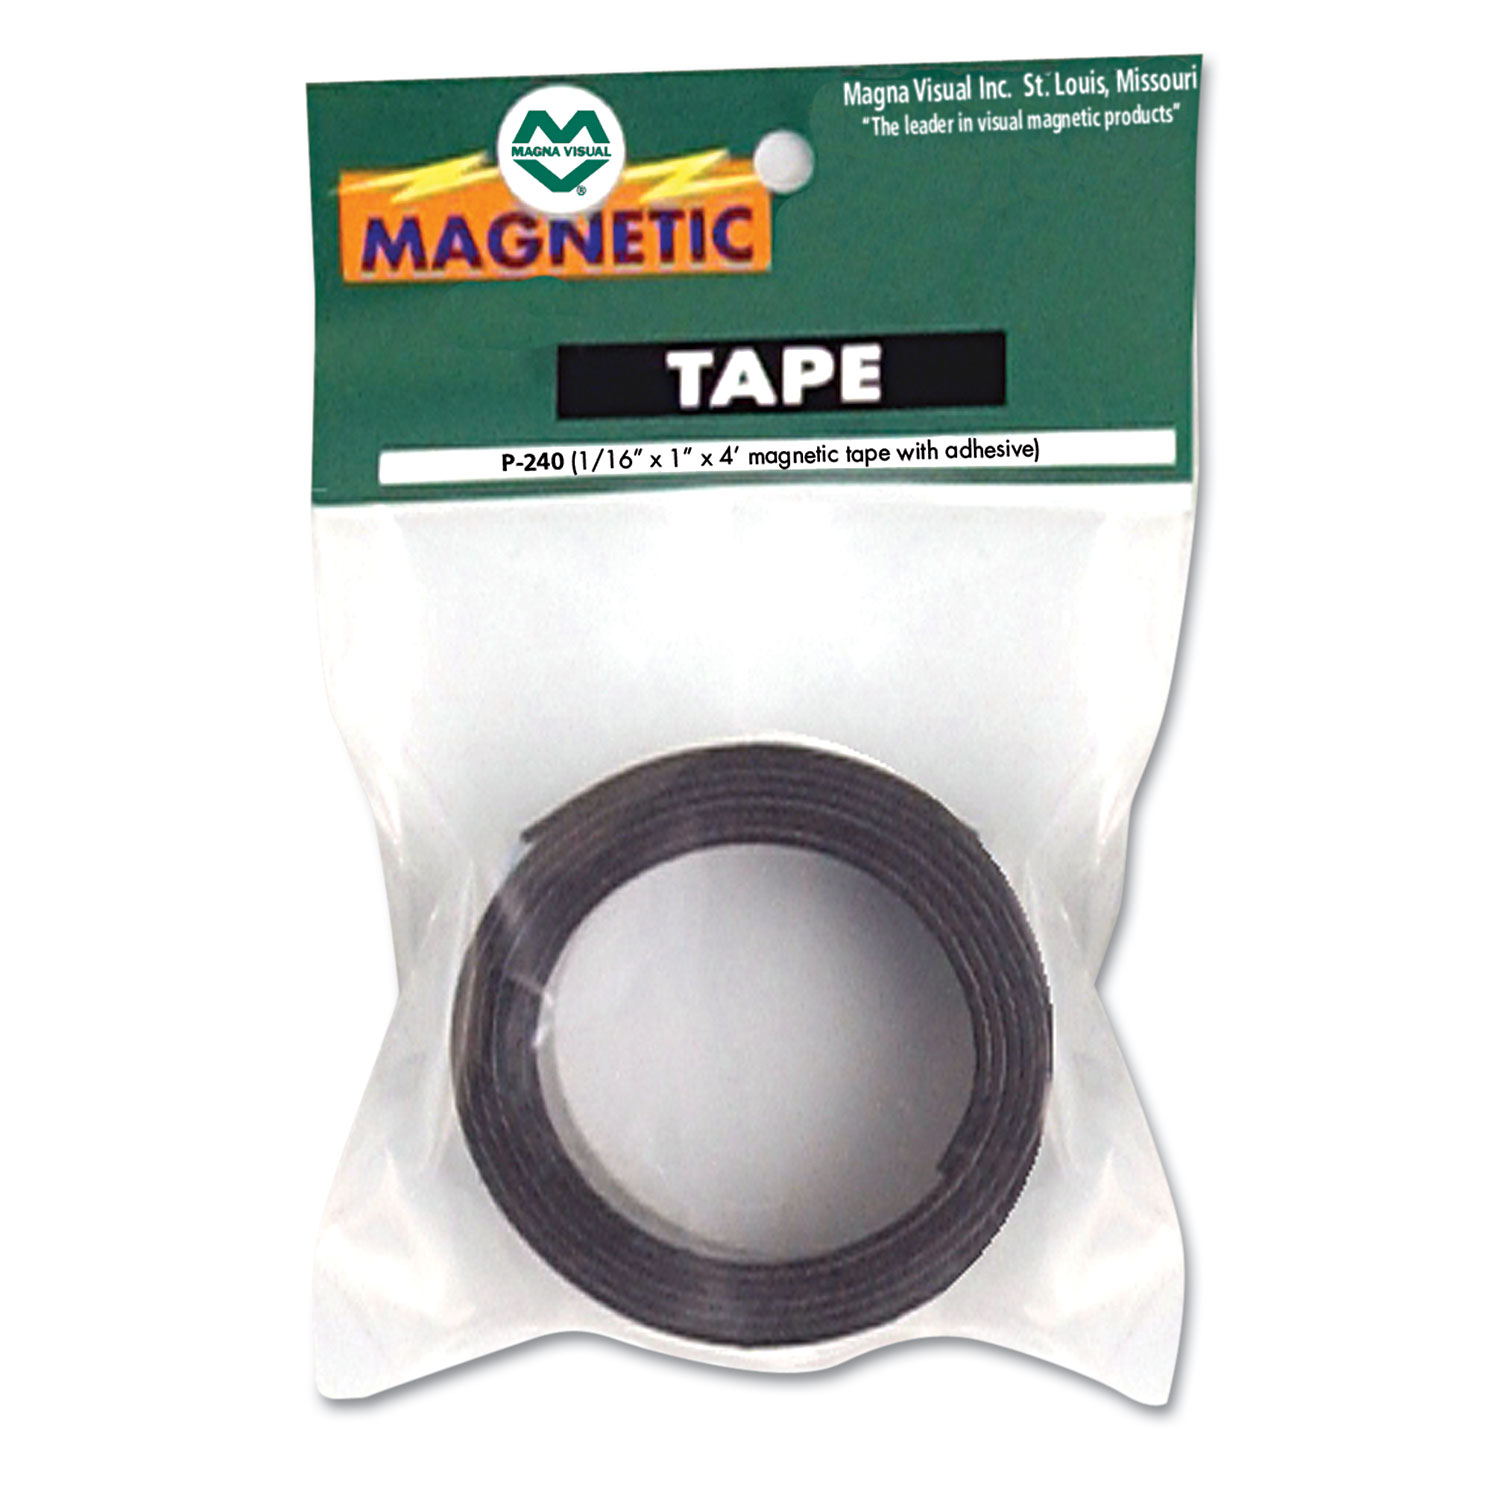 Magna Visual® Magnetic/Adhesive Tape, 1 x 4 ft Roll